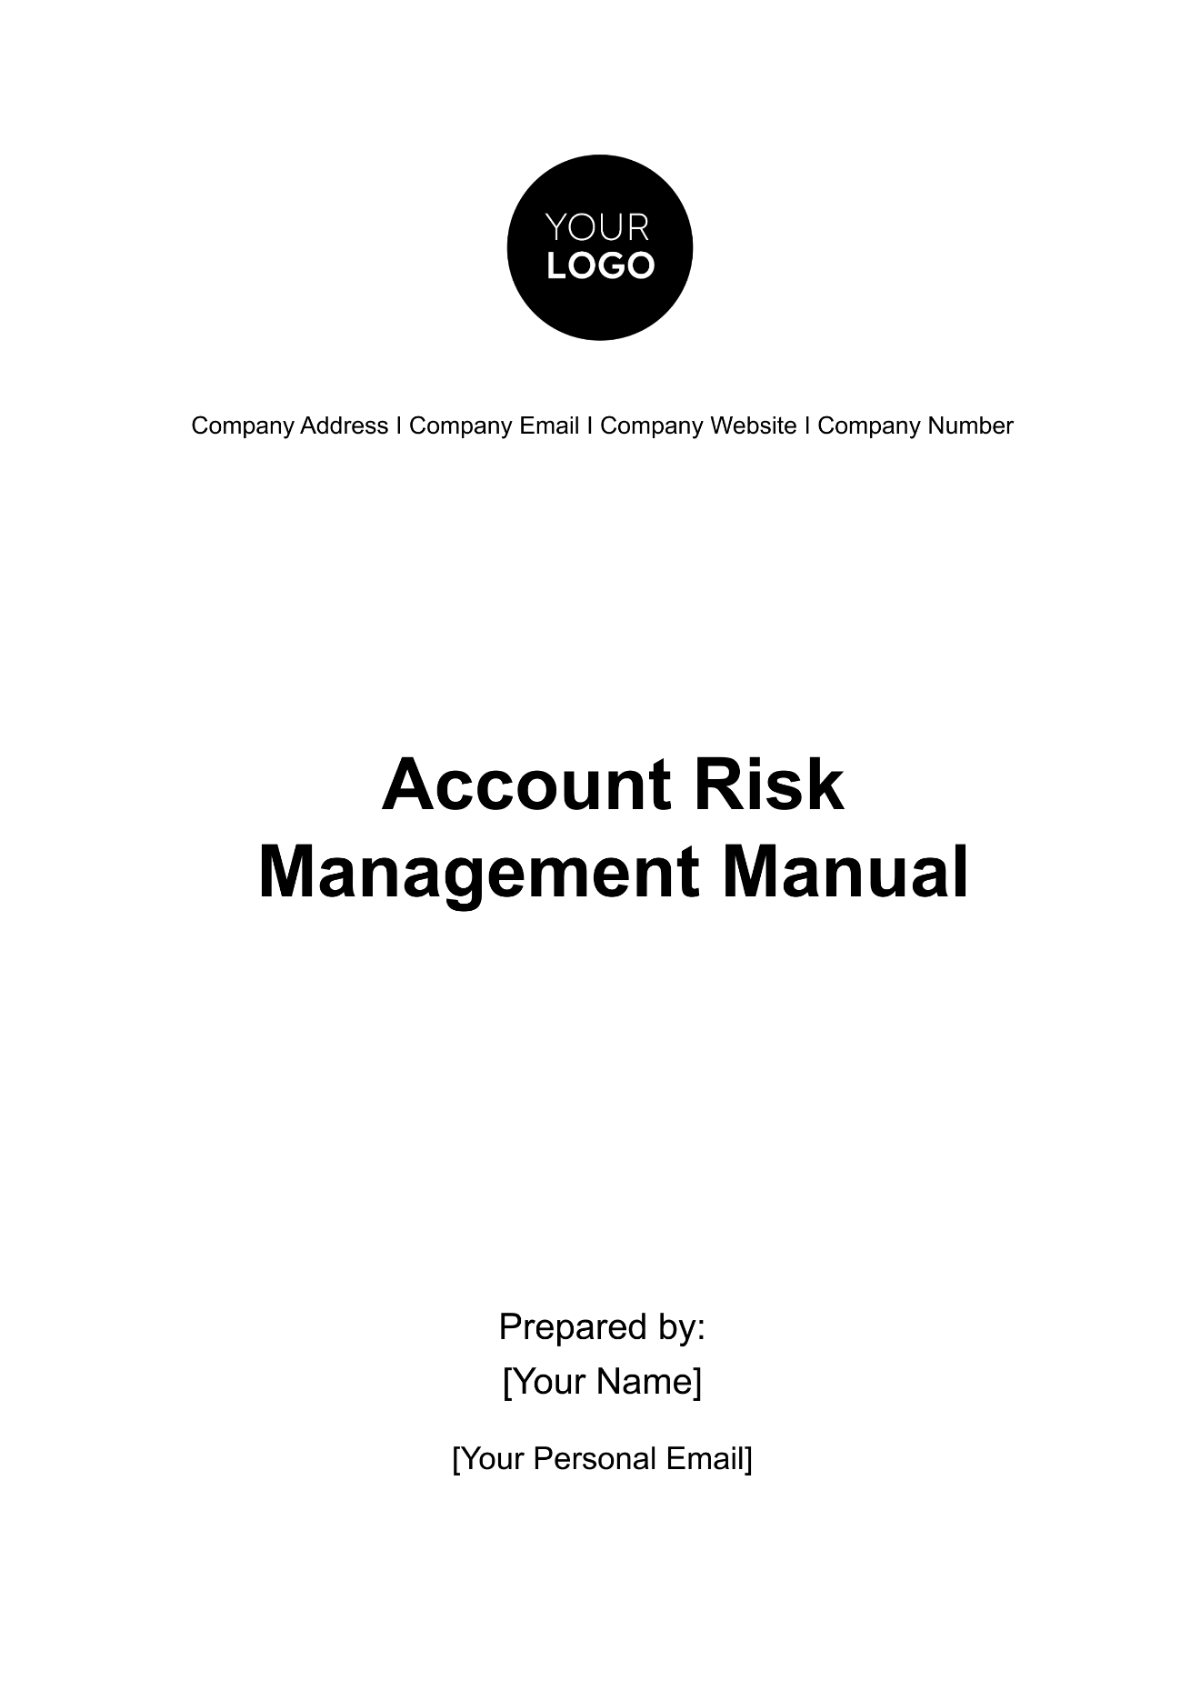 Account Risk Management Manual Template